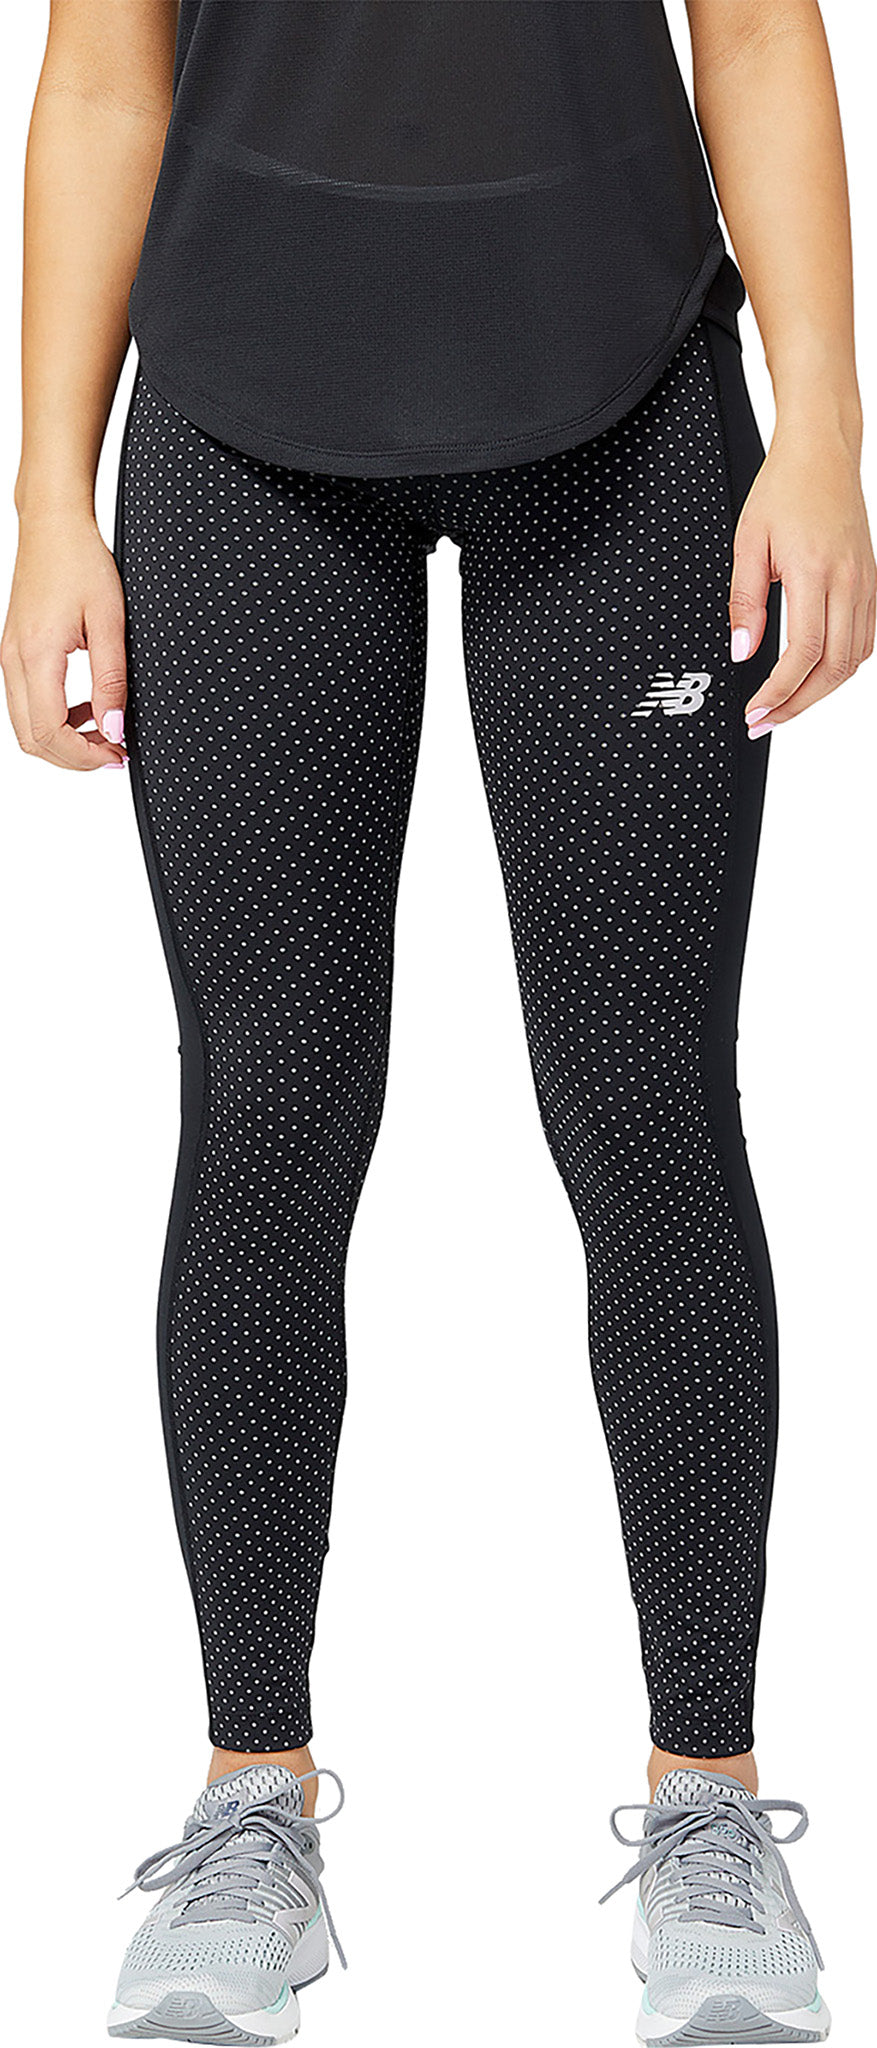 New Balance Reflective Accelerate Tight - Women's